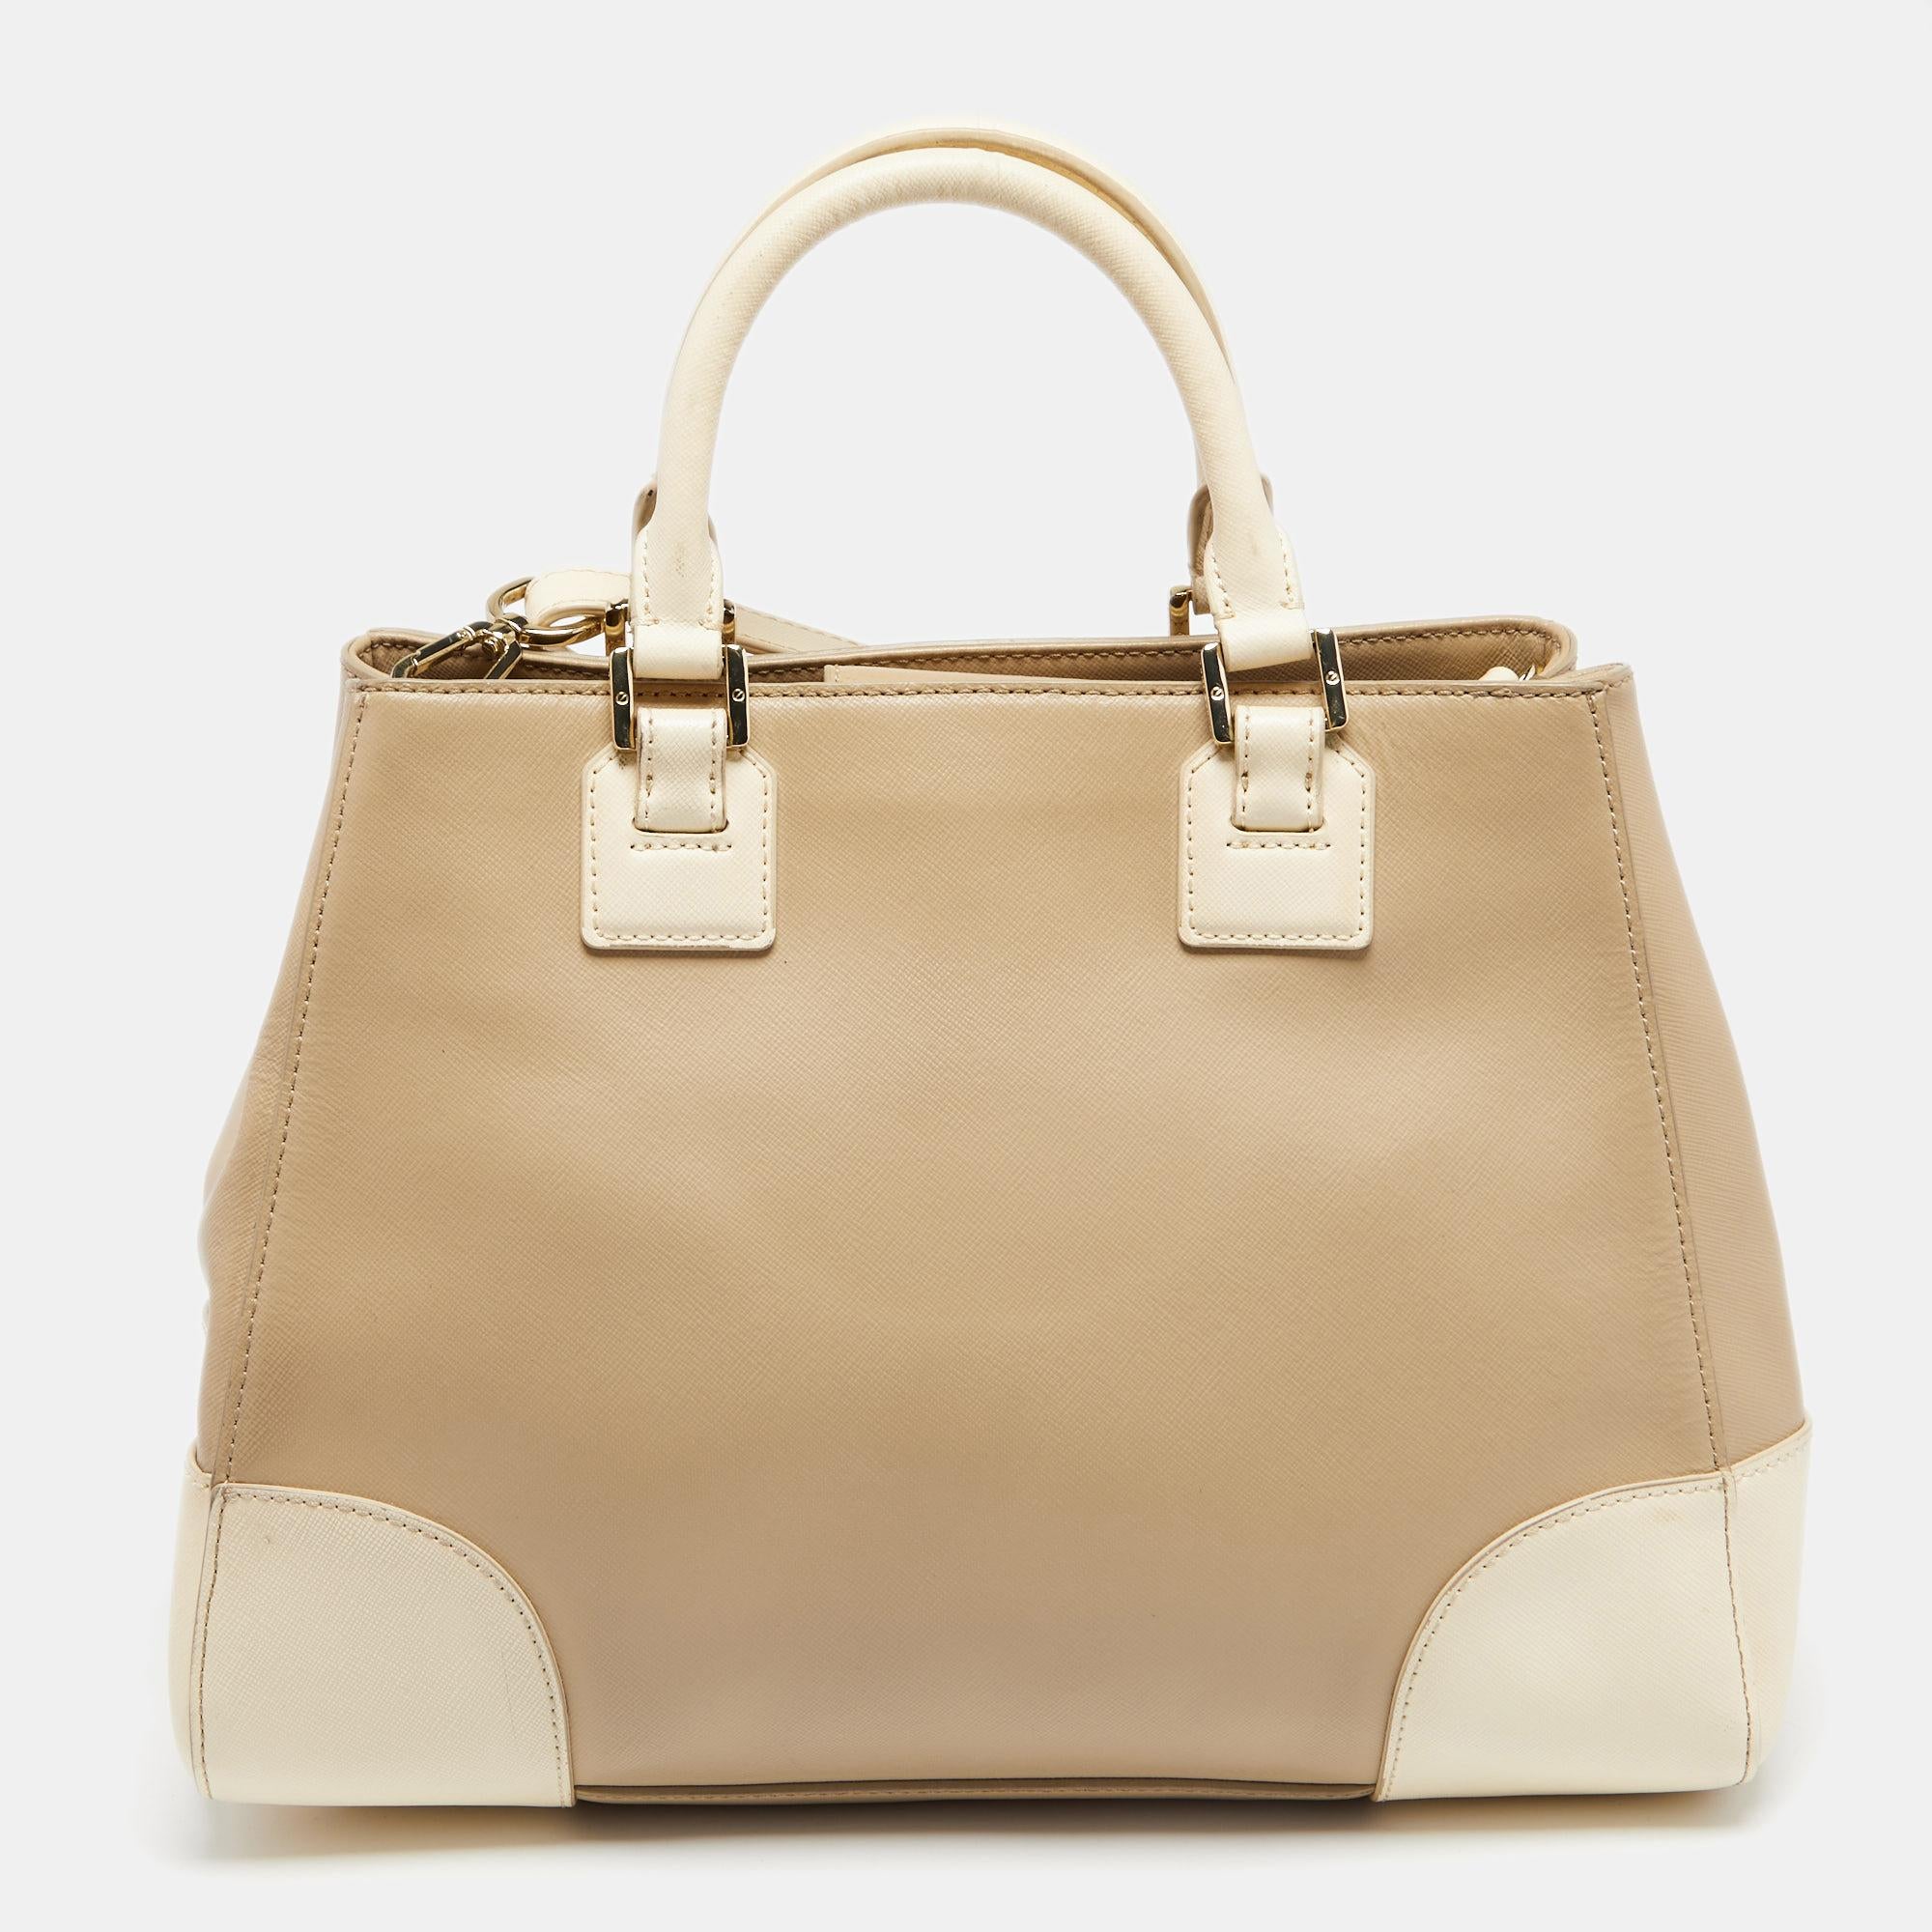 This Tory Burch leather tote has been crafted with attention to detail. Lined with fabric, the roomy interior has an ample amount of space to keep your belongings safe. While the dual handles and a shoulder strap make it comfortable to carry, the